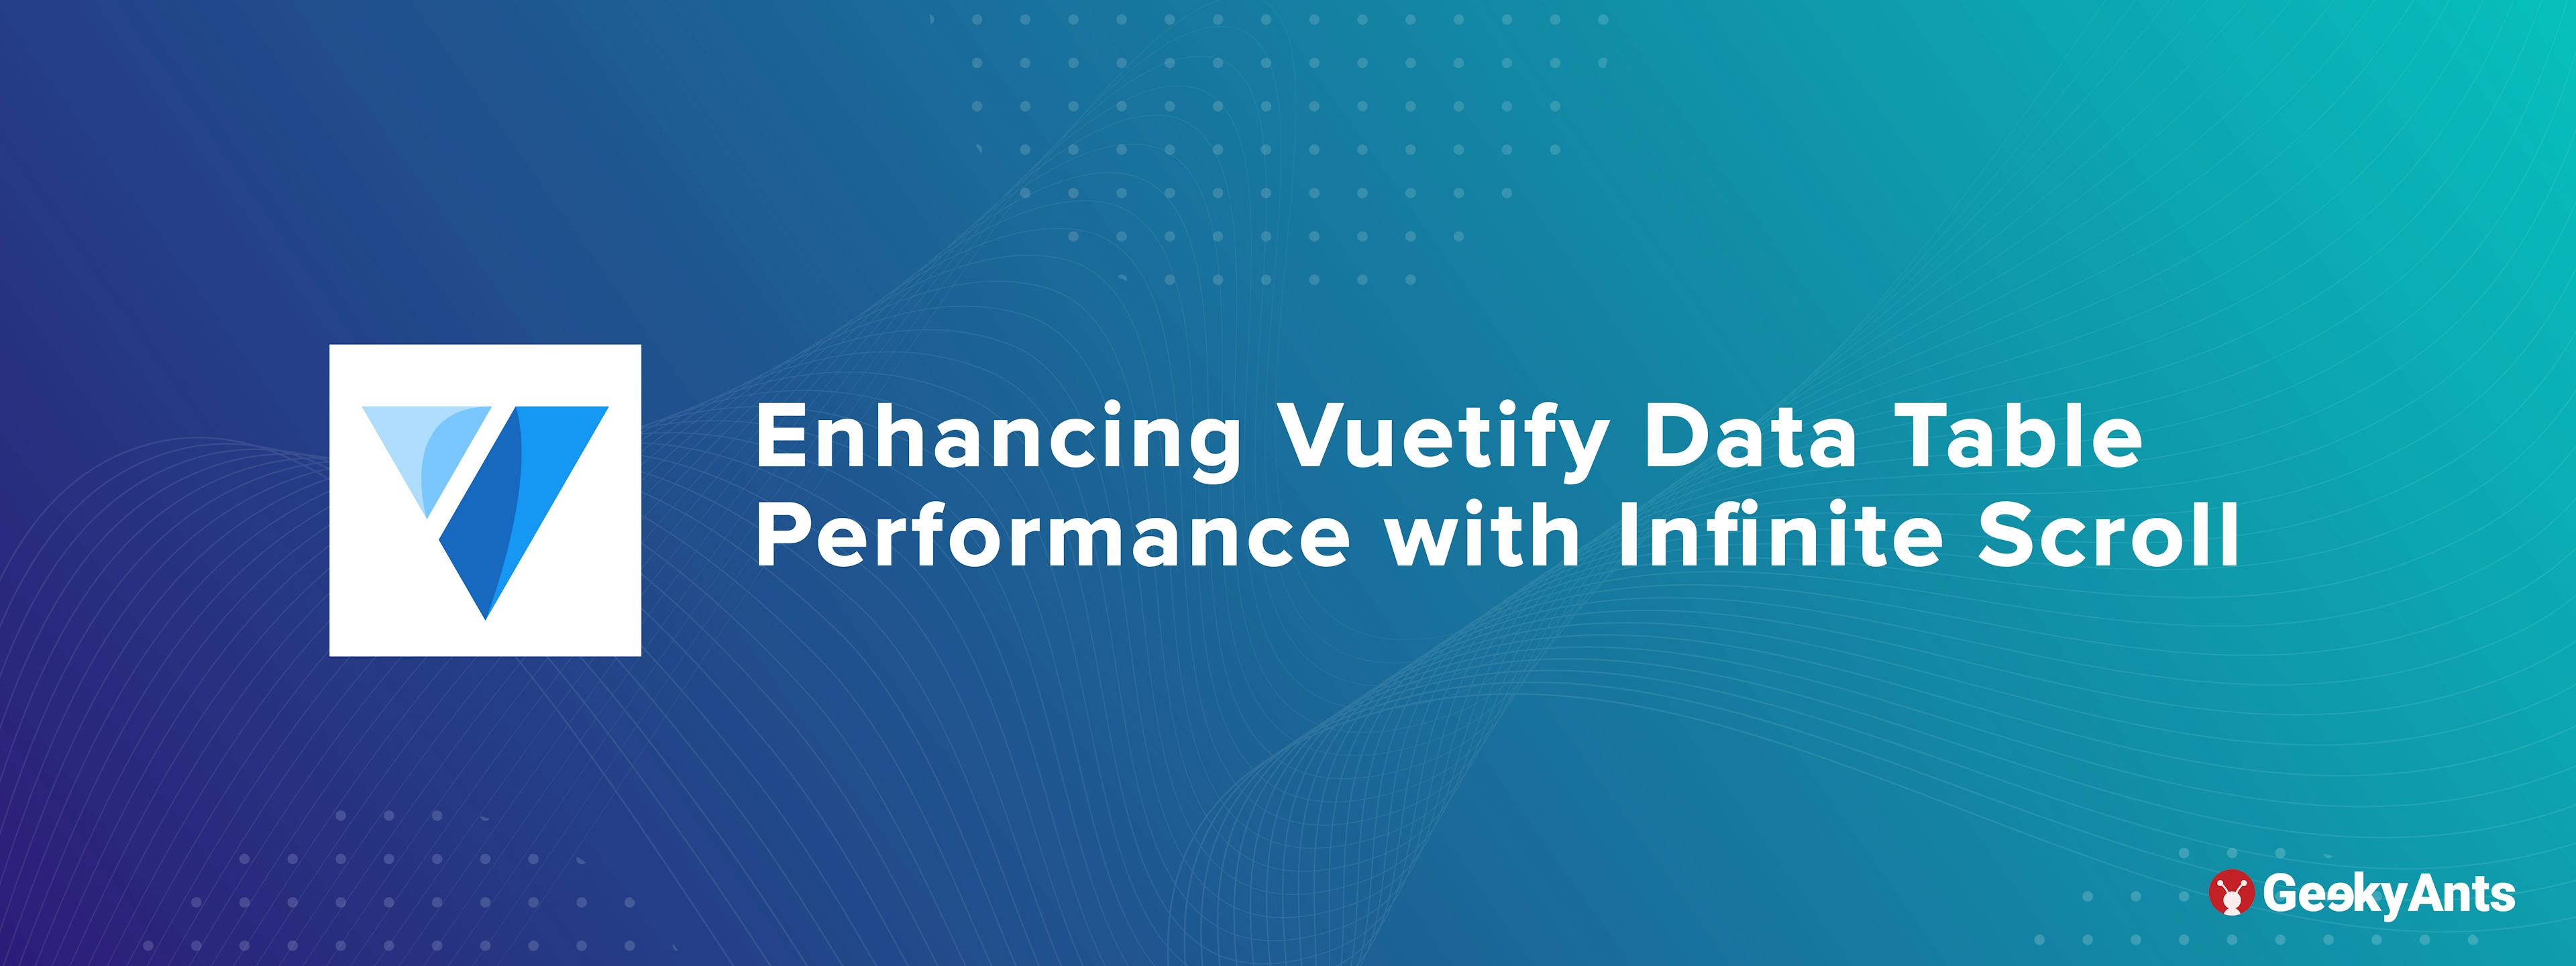 Enhancing Vuetify Data Table Performance with Infinite Scroll